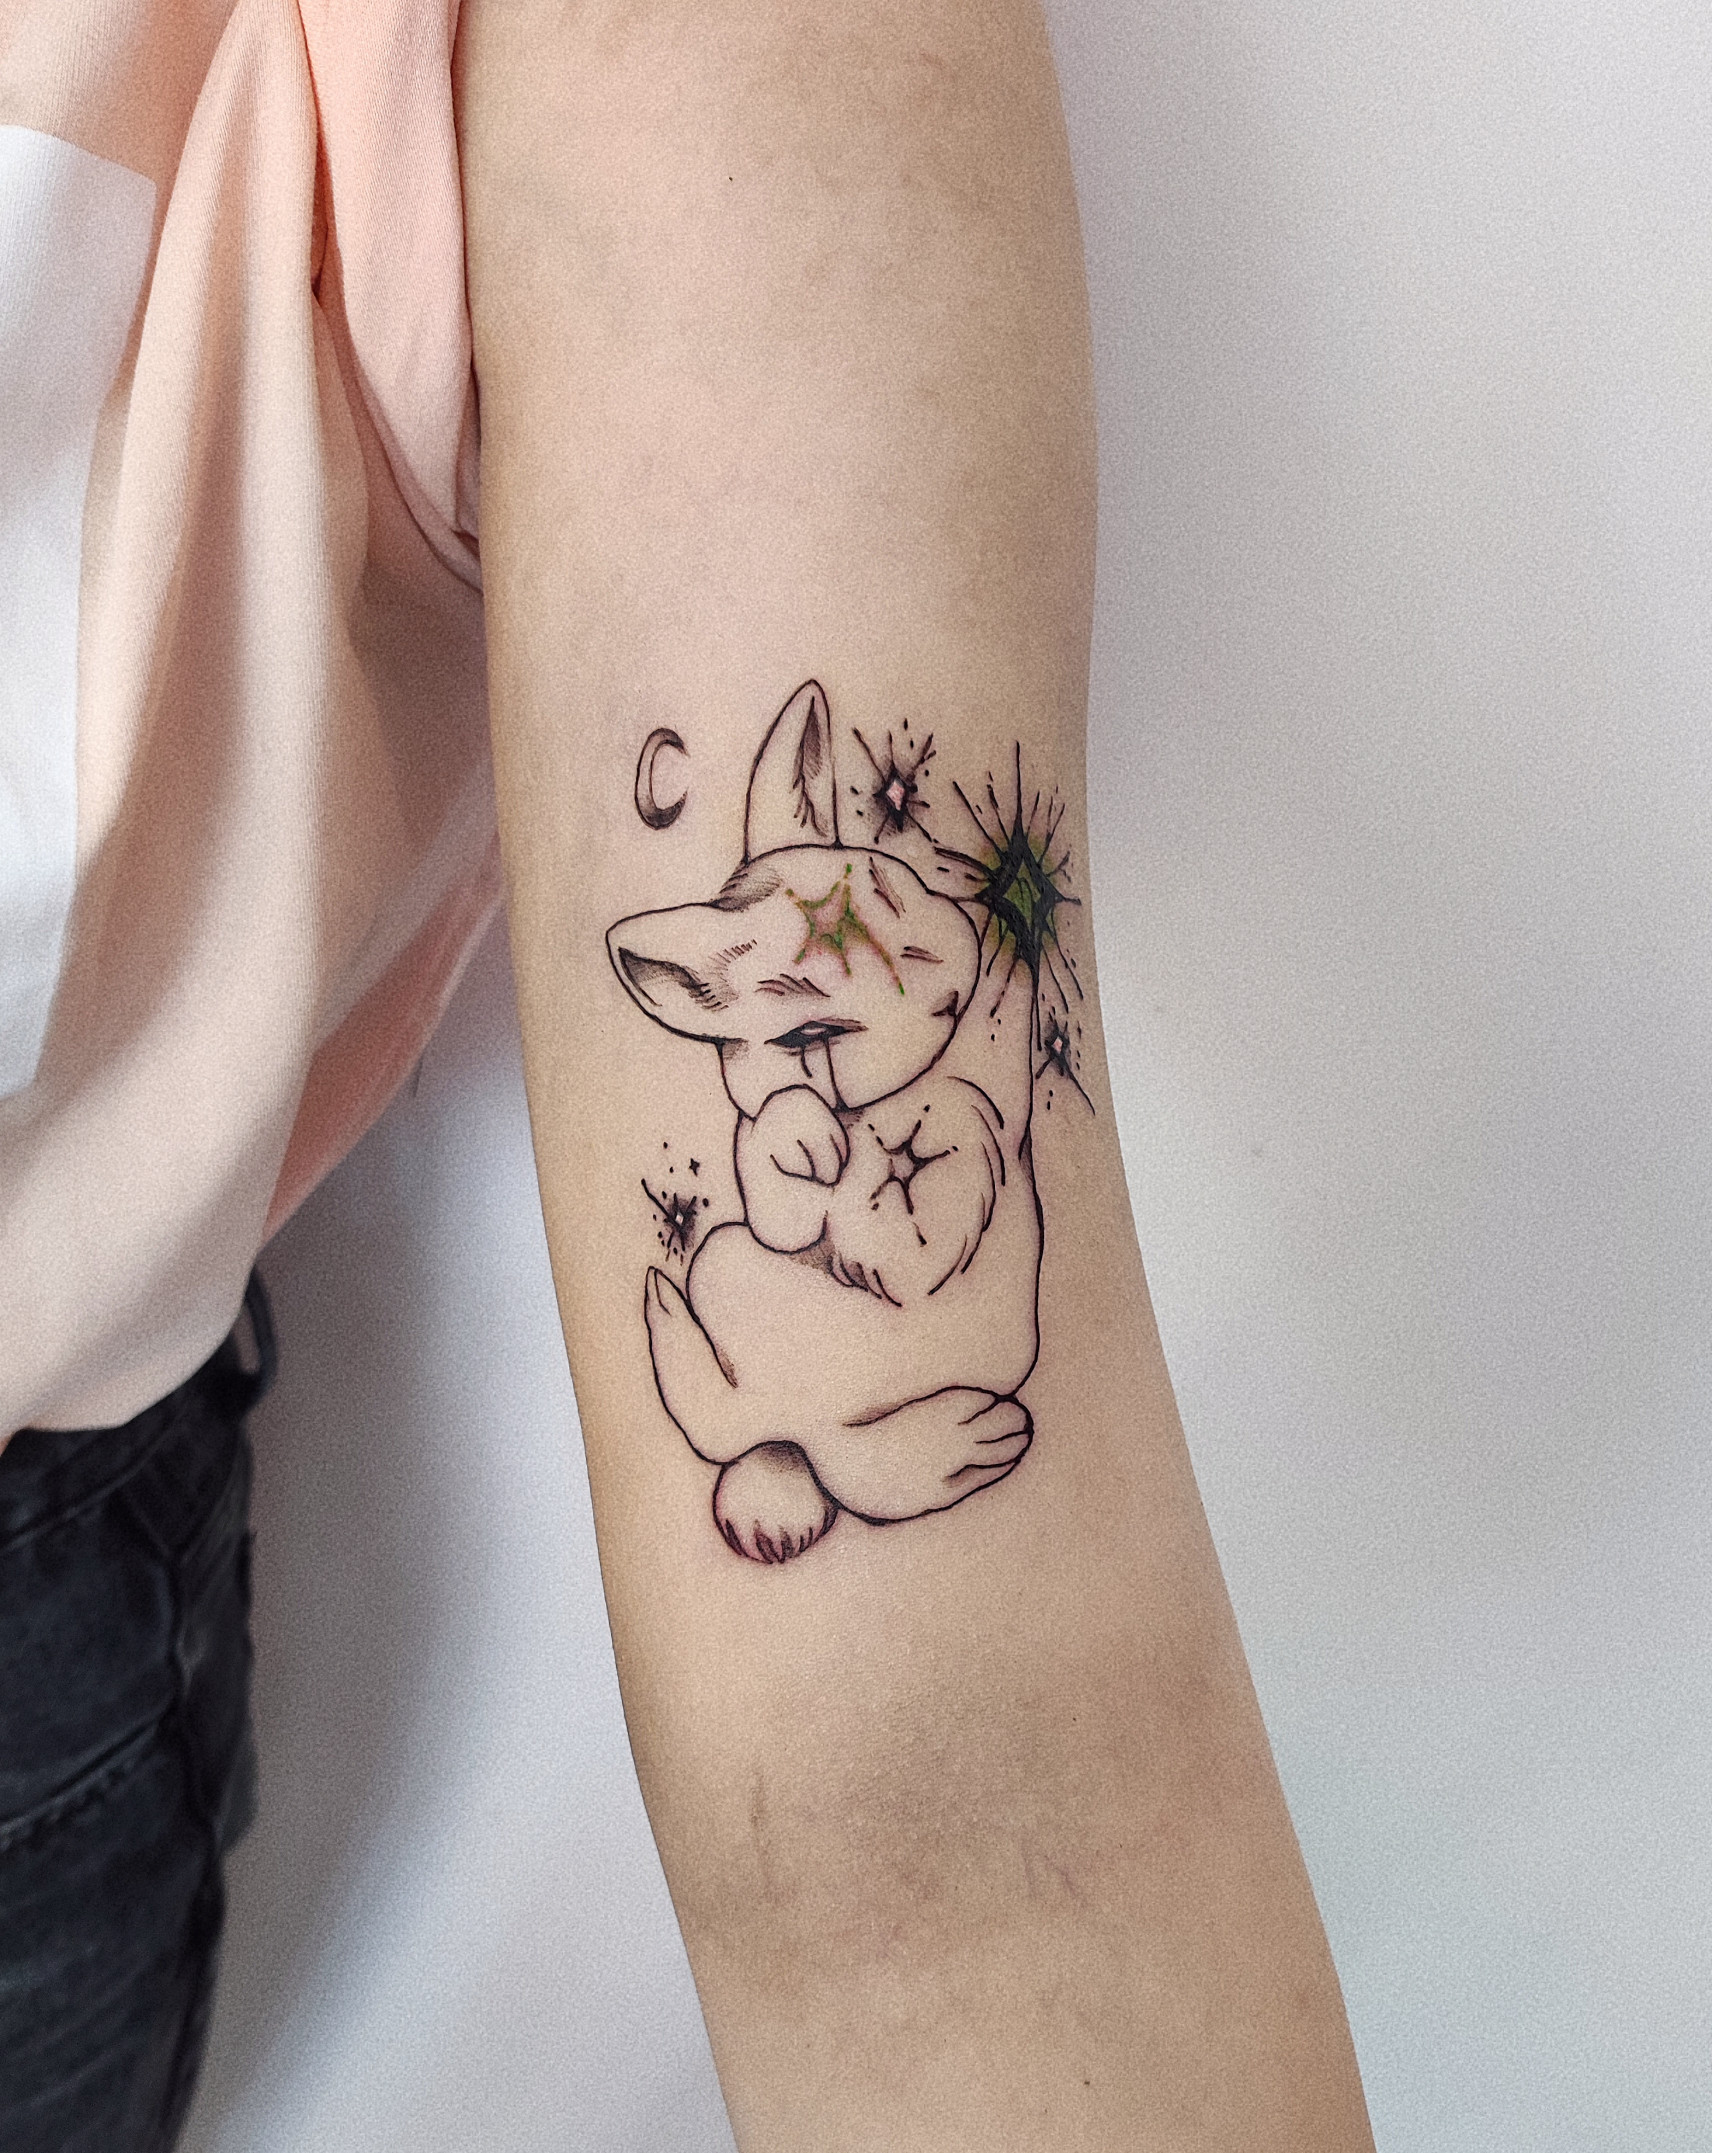 Buy Cute Rabbit Tattoo Online In India - Etsy India